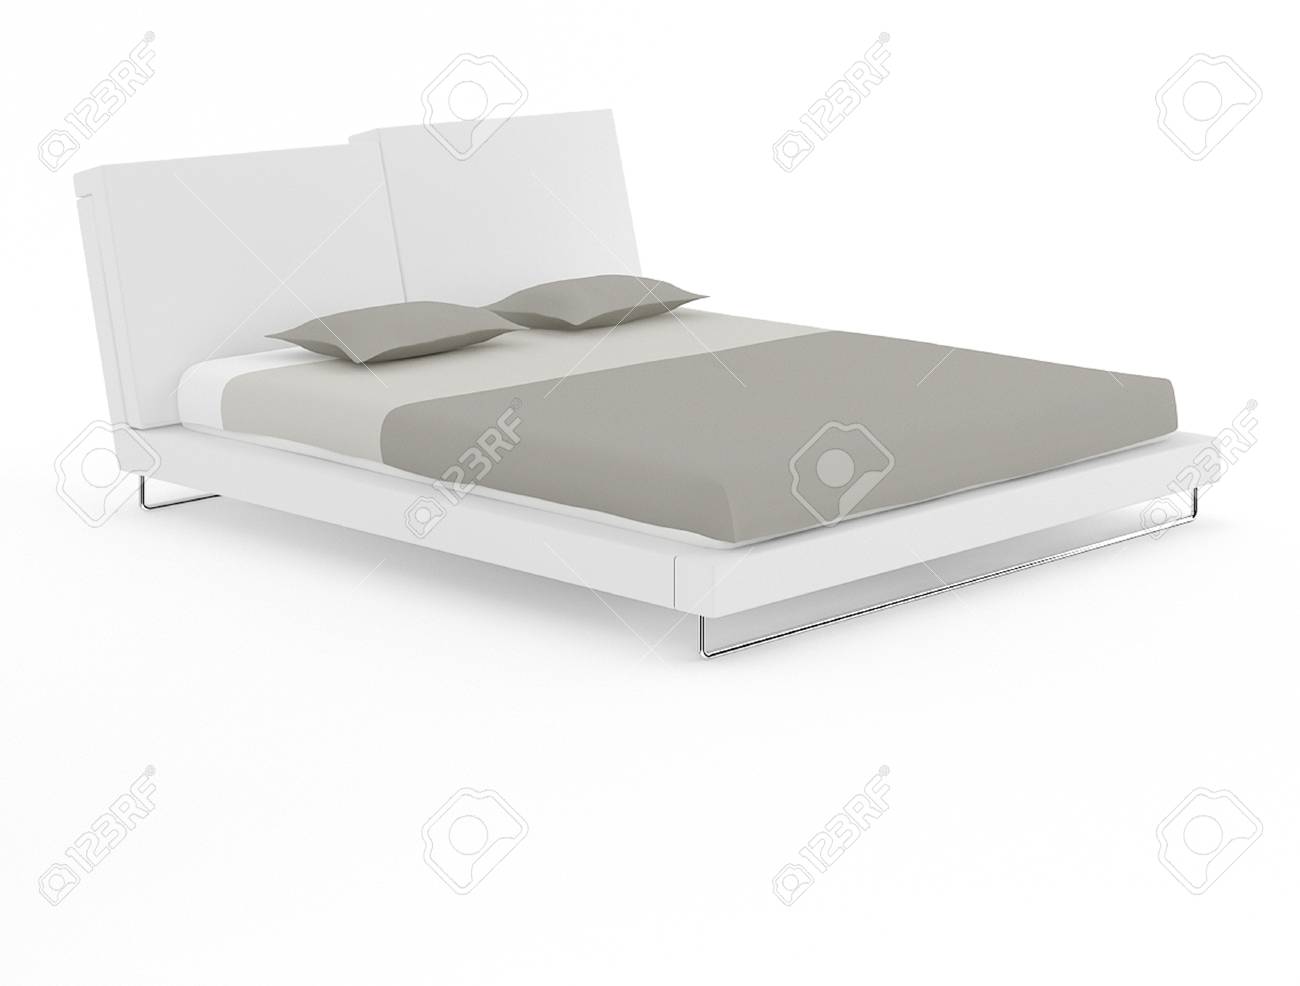 Fortable Double Bed With Mattress And Pillows On White